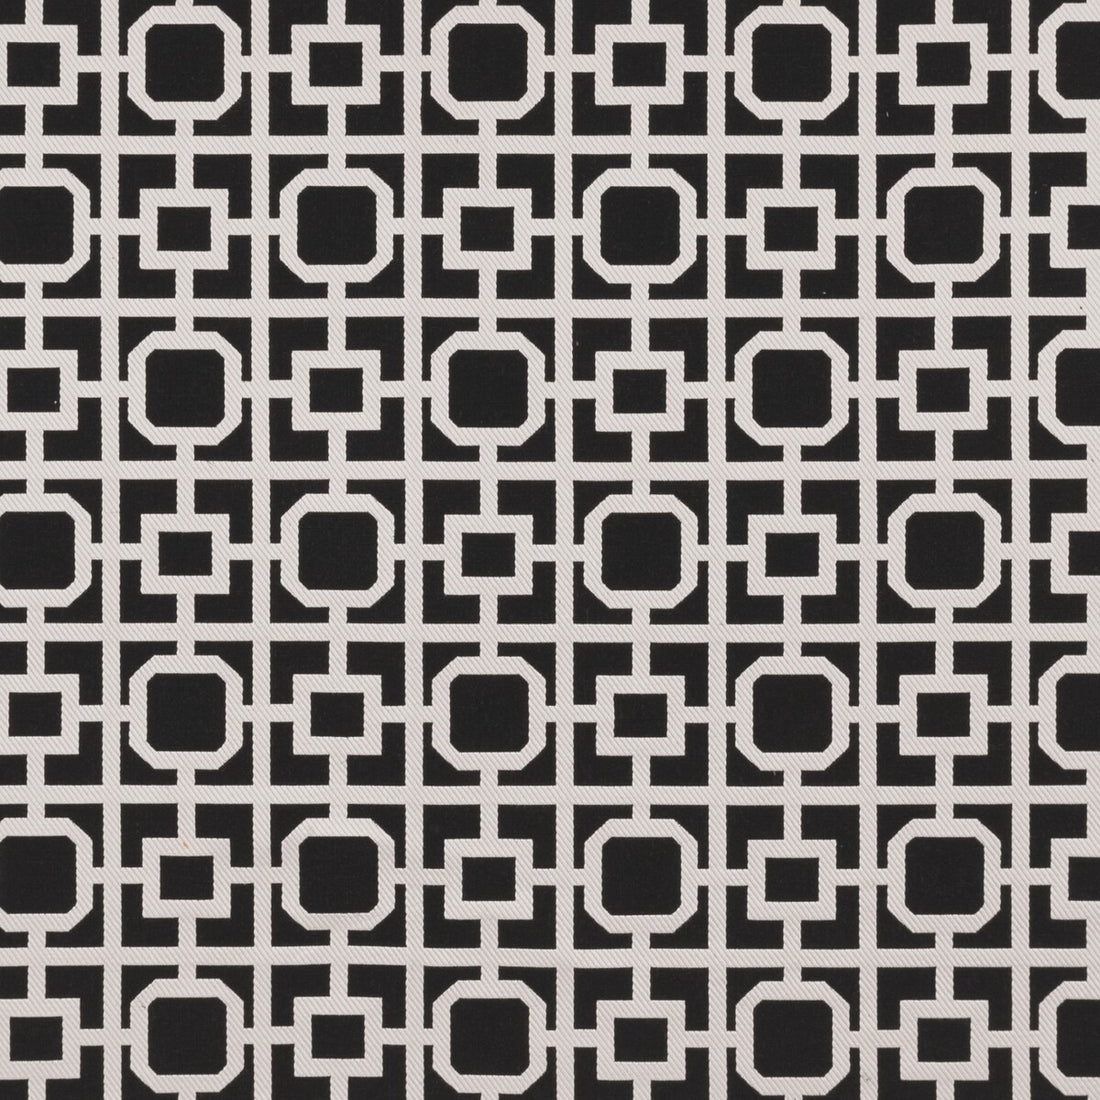 Bw1017 fabric in black/white color - pattern F0890/01.CAC.0 - by Clarke And Clarke in the Clarke &amp; Clarke Black + White collection